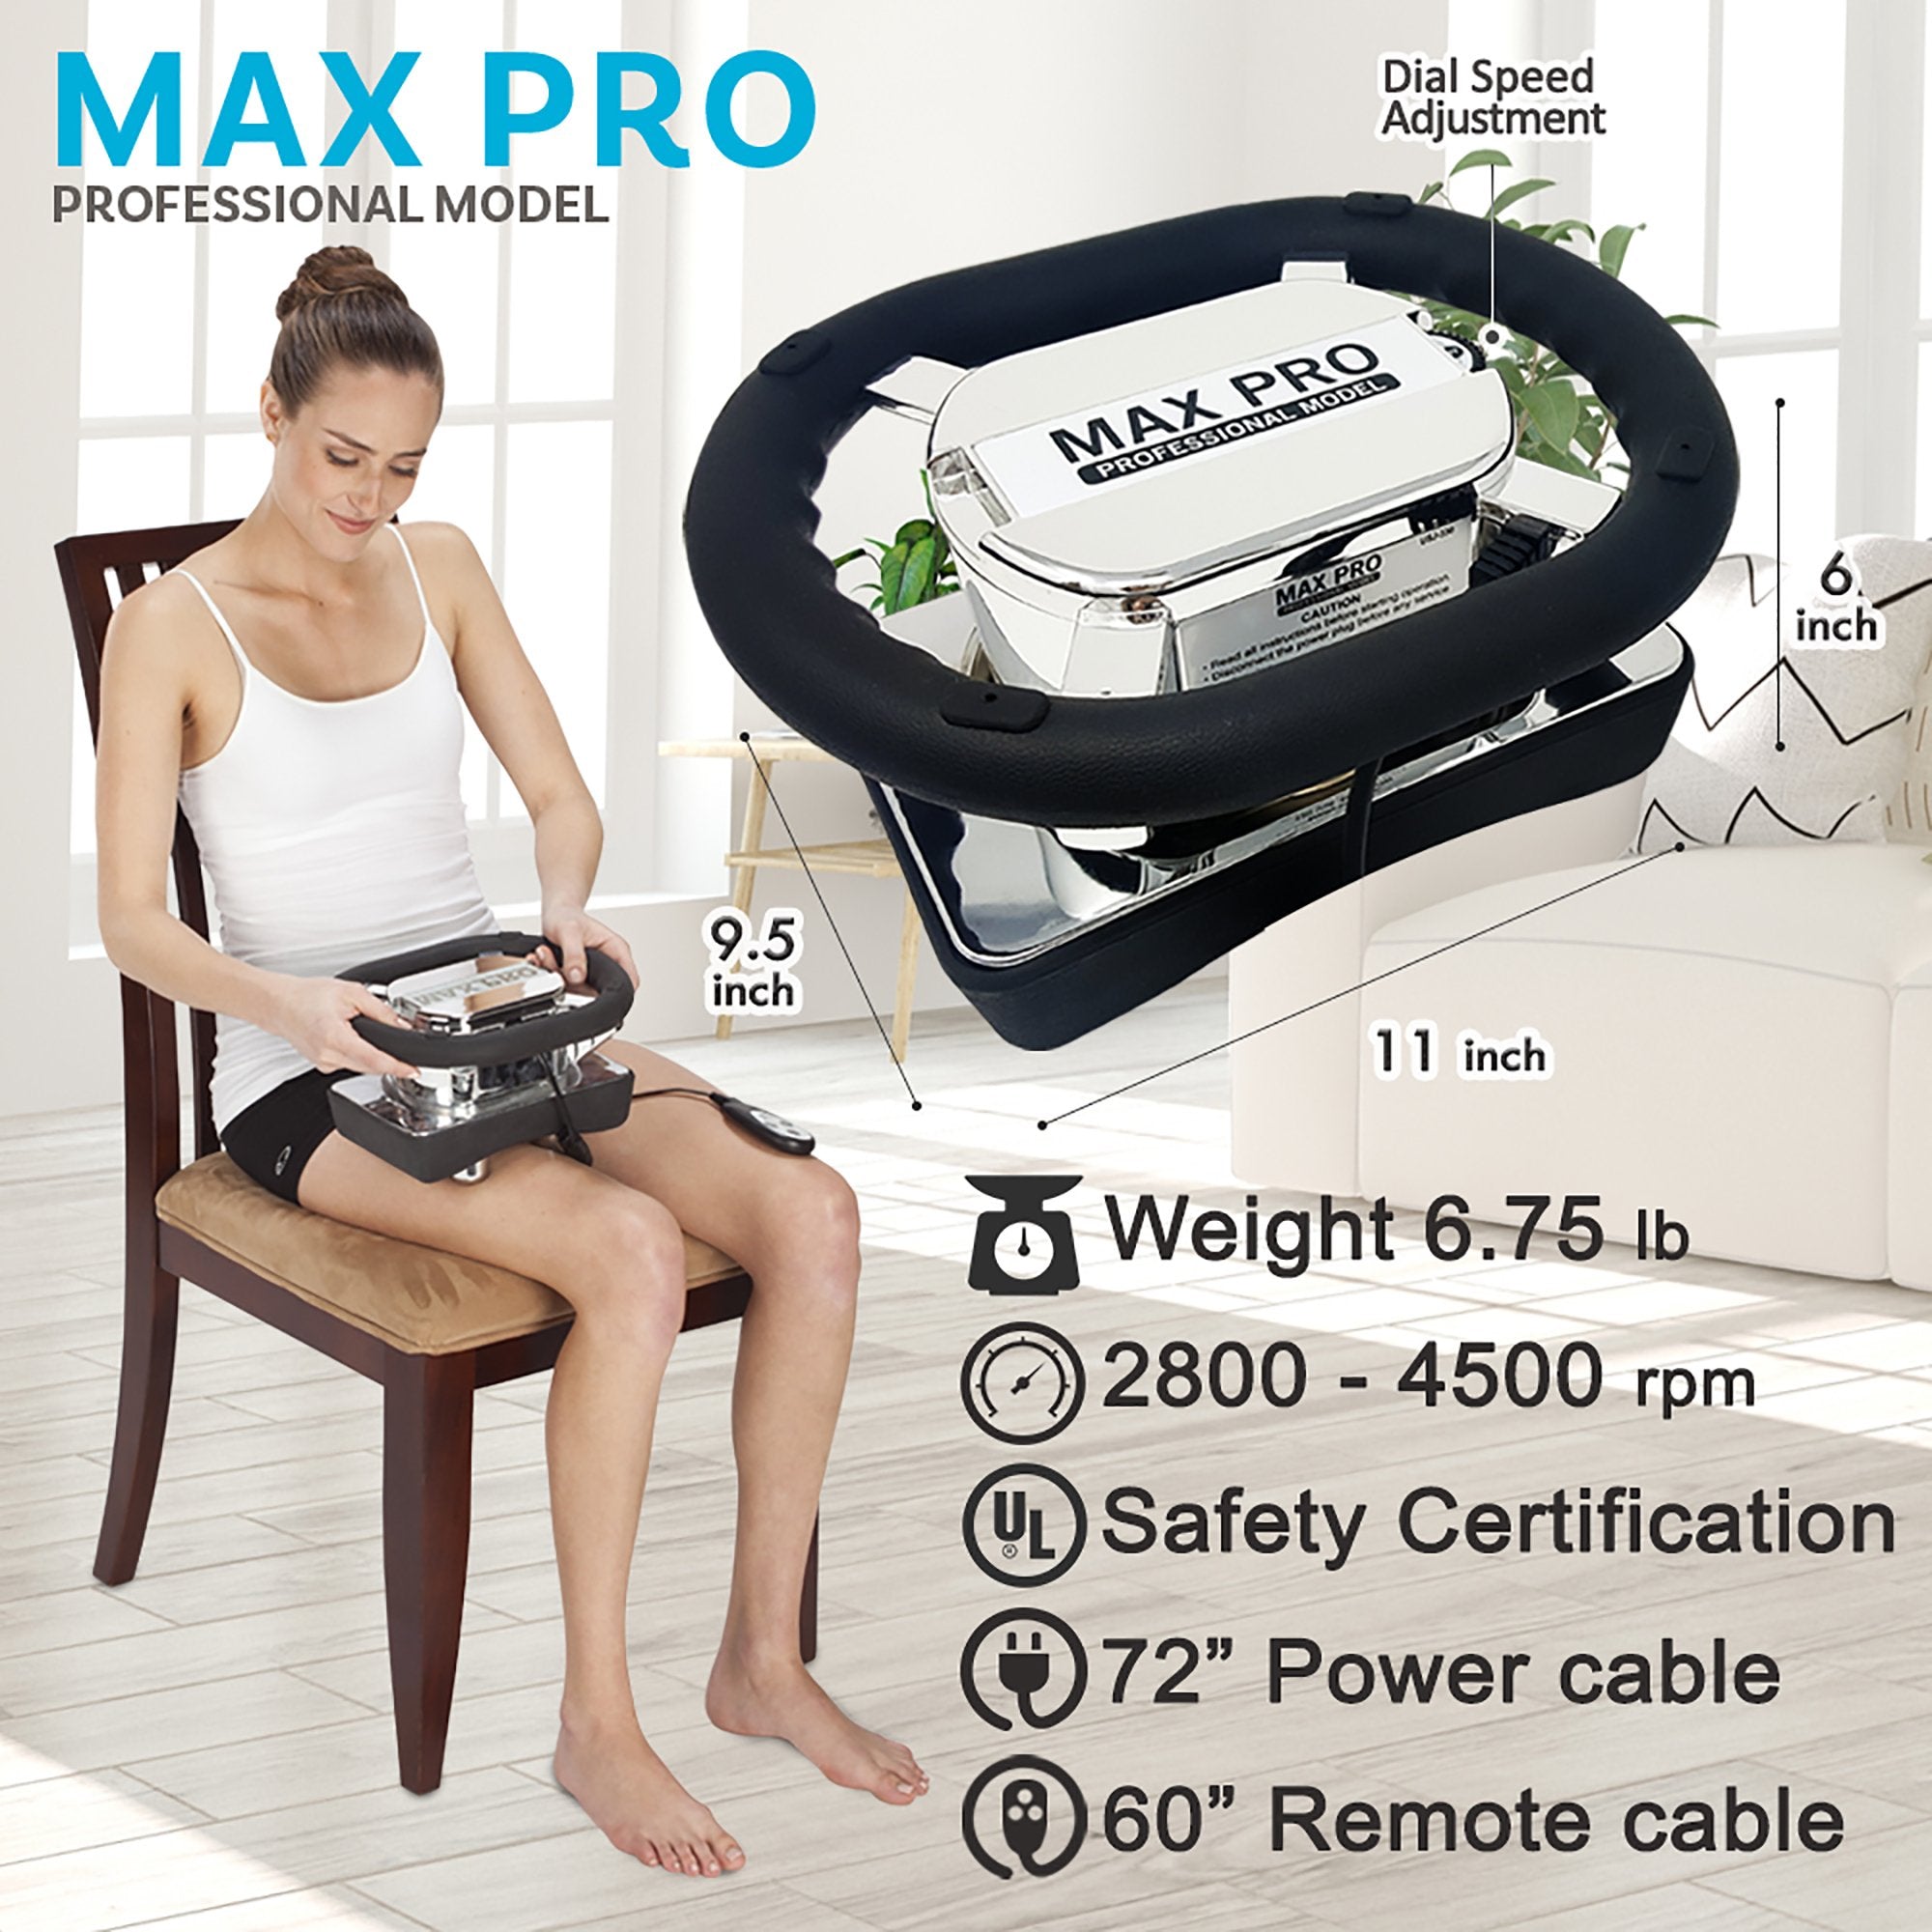 [Refurbished] Max Pro Chiropractic Massager Professional Heavy Duty Rub Variable Speed Massager